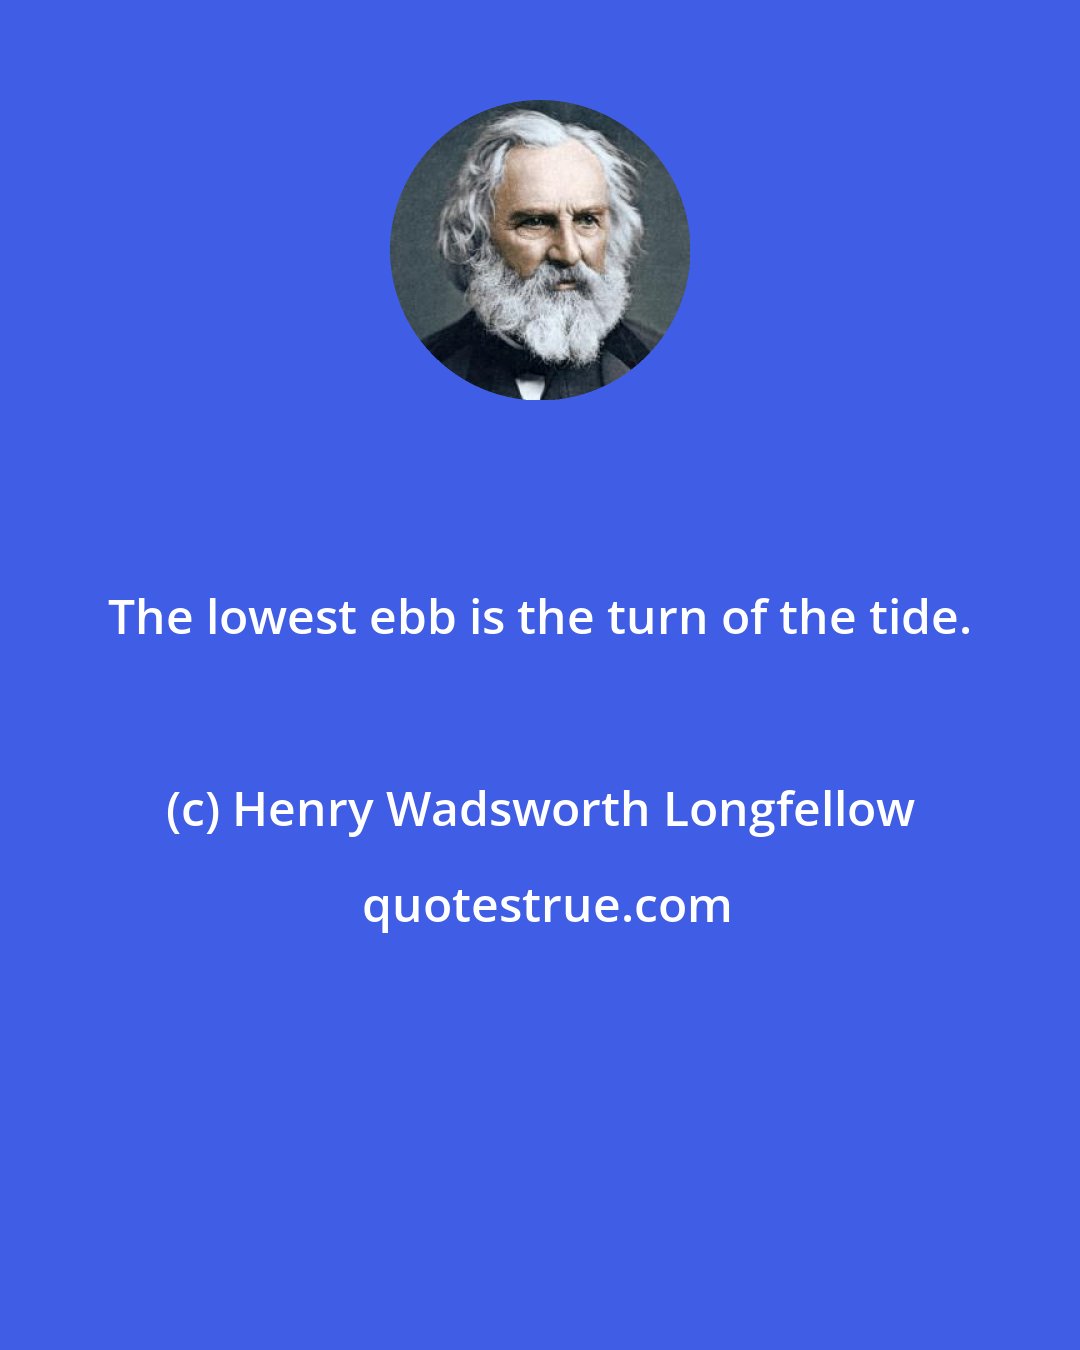 Henry Wadsworth Longfellow: The lowest ebb is the turn of the tide.